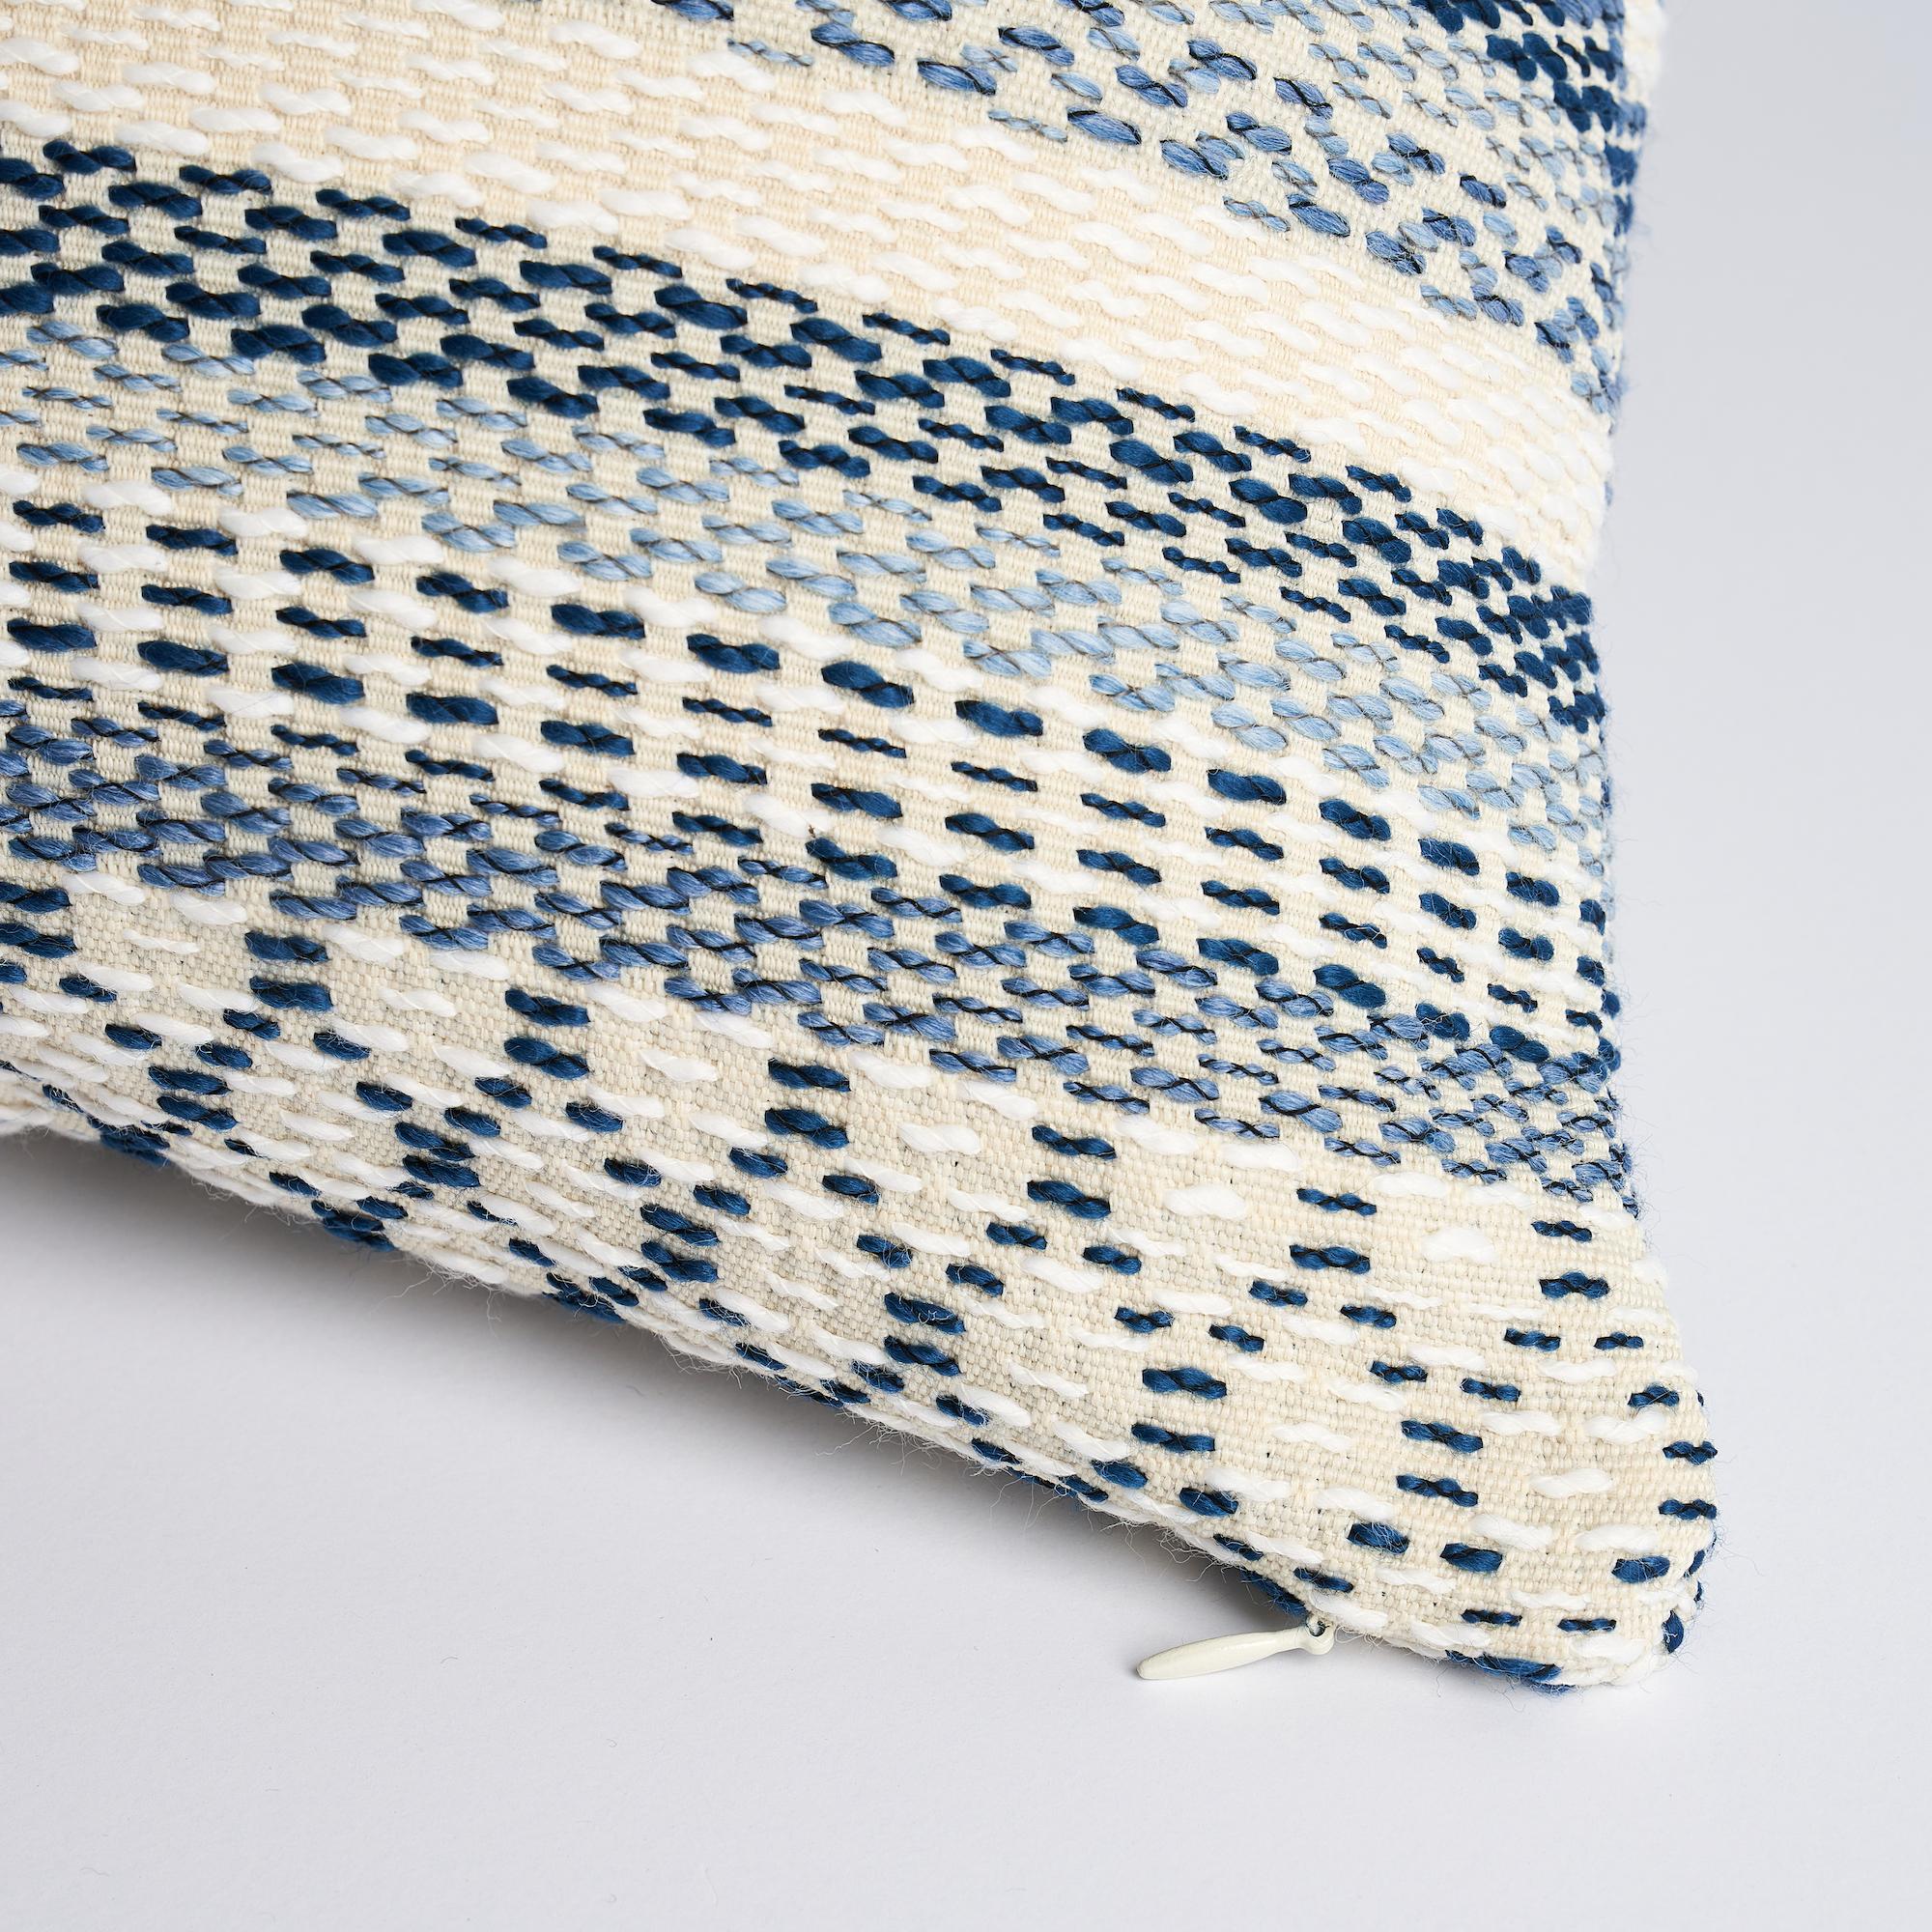 This pillow features Fremont Indoor/Outdoor with a knife edge finish. Don‚Äôt be fooled by this rich, geometric woven stripe‚Äîit‚Äôs as durable as it is chic. With rustic blanket construction, this use-anywhere high-performance standby feels